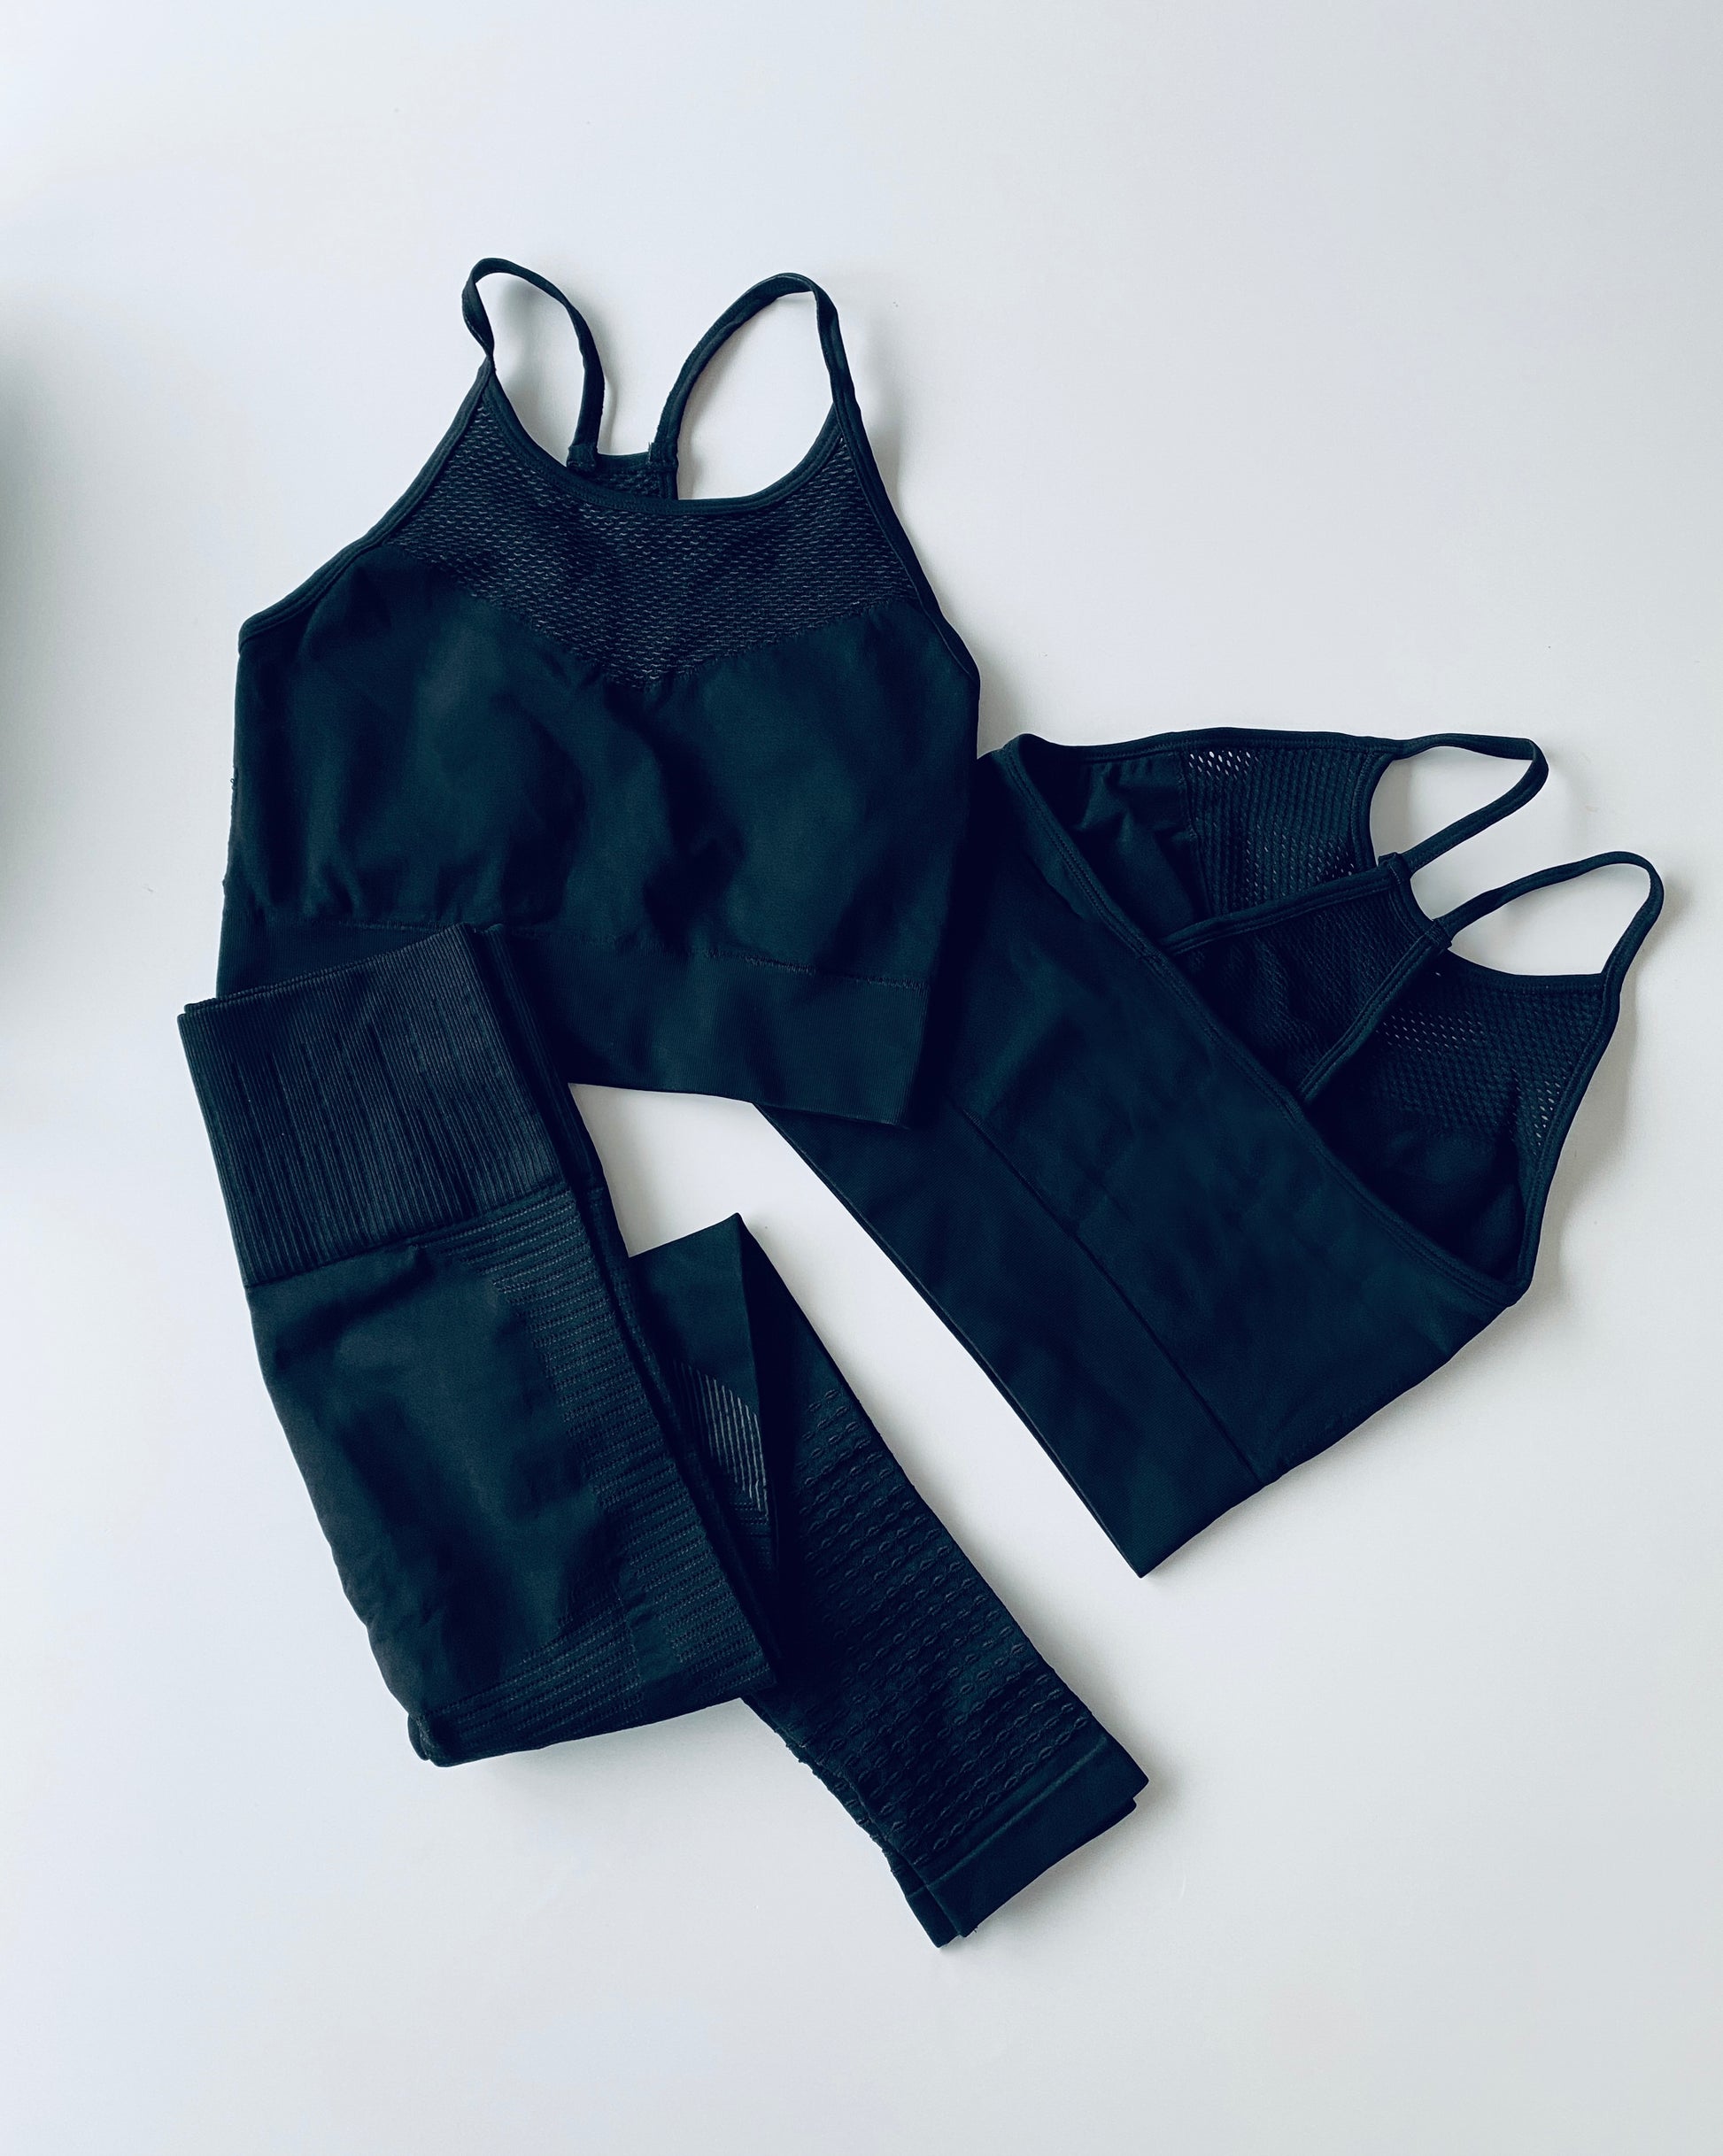 Seamless gym, sports, .activewear leggings in black from The Collective Dancewear